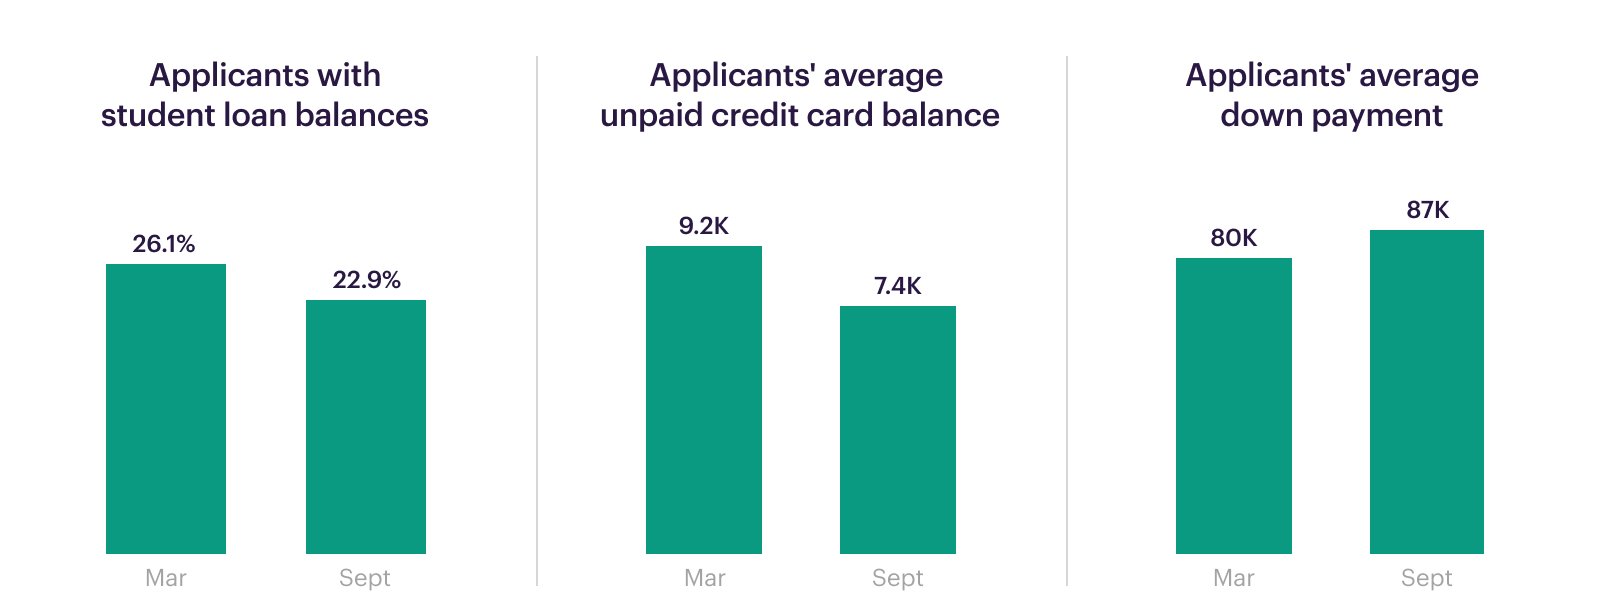 Better Applicants in September and March: Applicants with Student Loan Balances, Average Unpaid Credit Balance, Average Down Payment